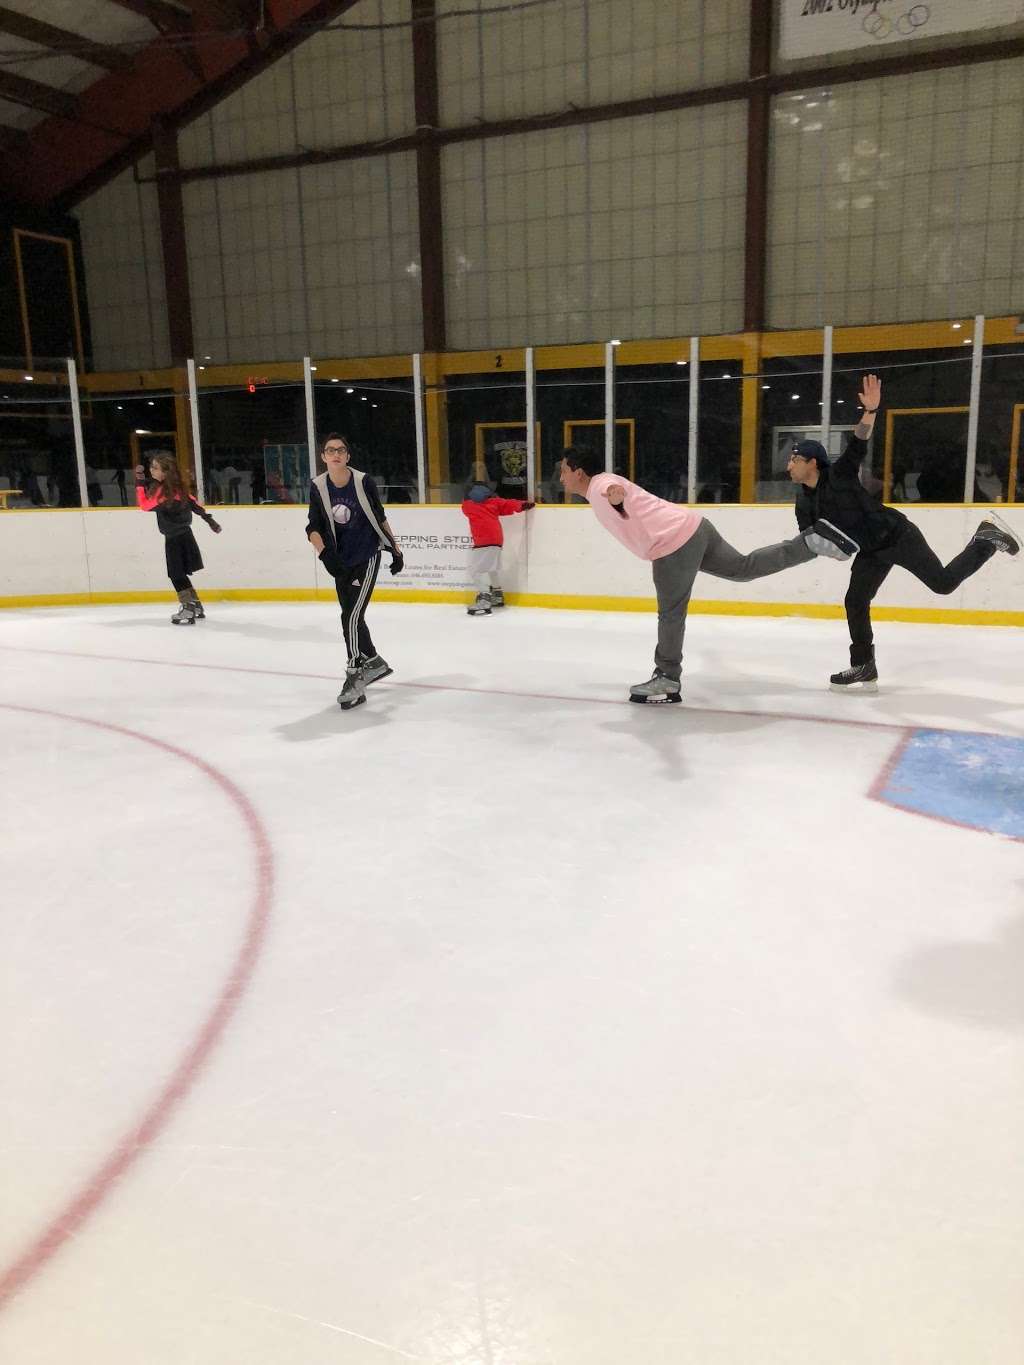 Andrew Stergiopoulos Ice Rink | 65 Arrandale Ave, Great Neck, NY 11024 | Phone: (516) 487-2976